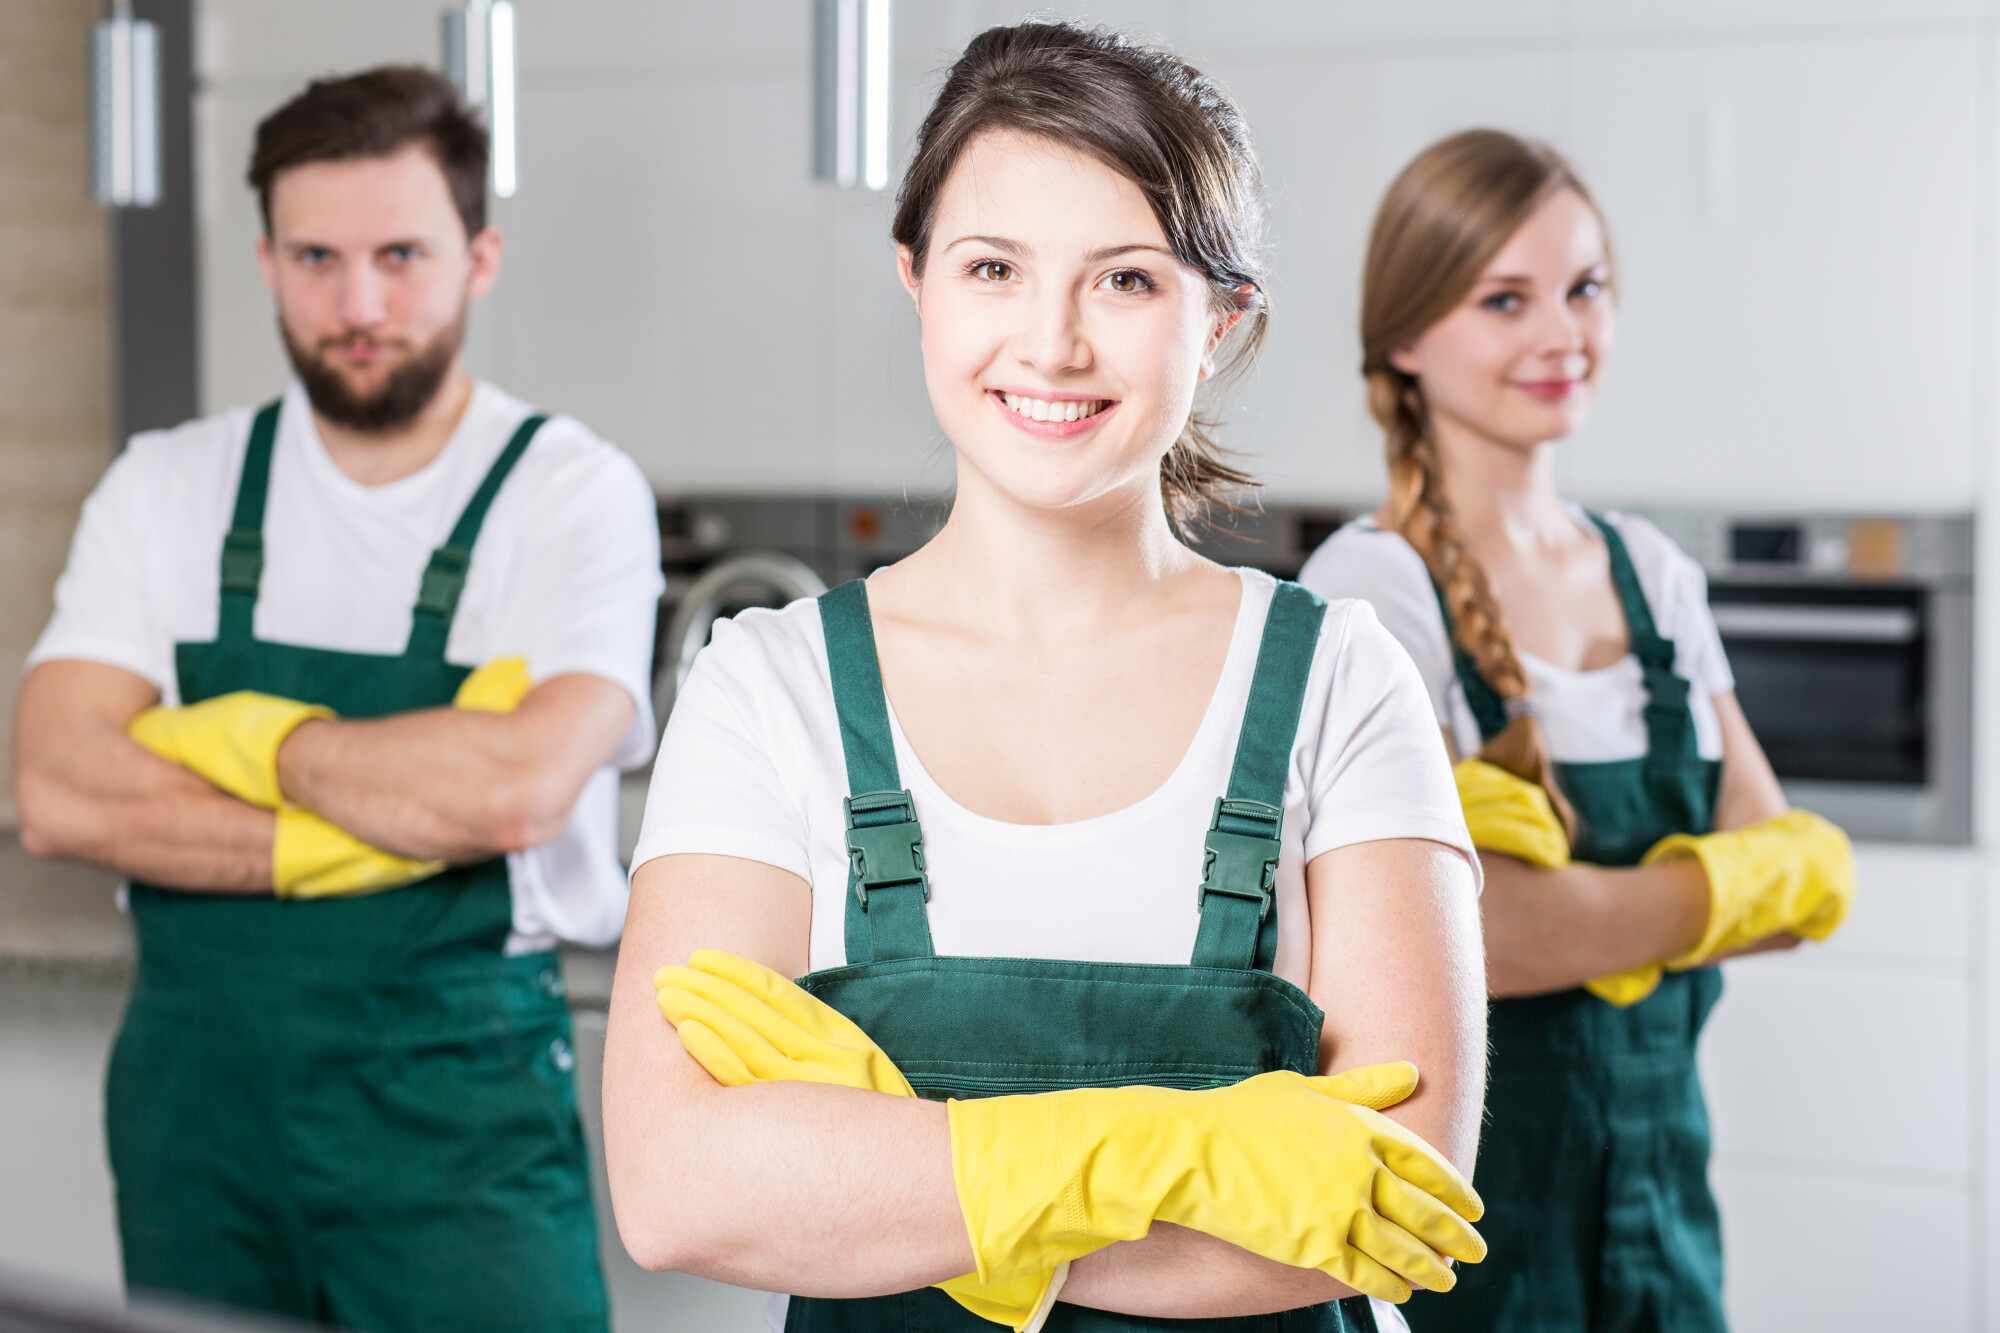 6 Benefits of Hiring a Professional Cleaner for Your Home